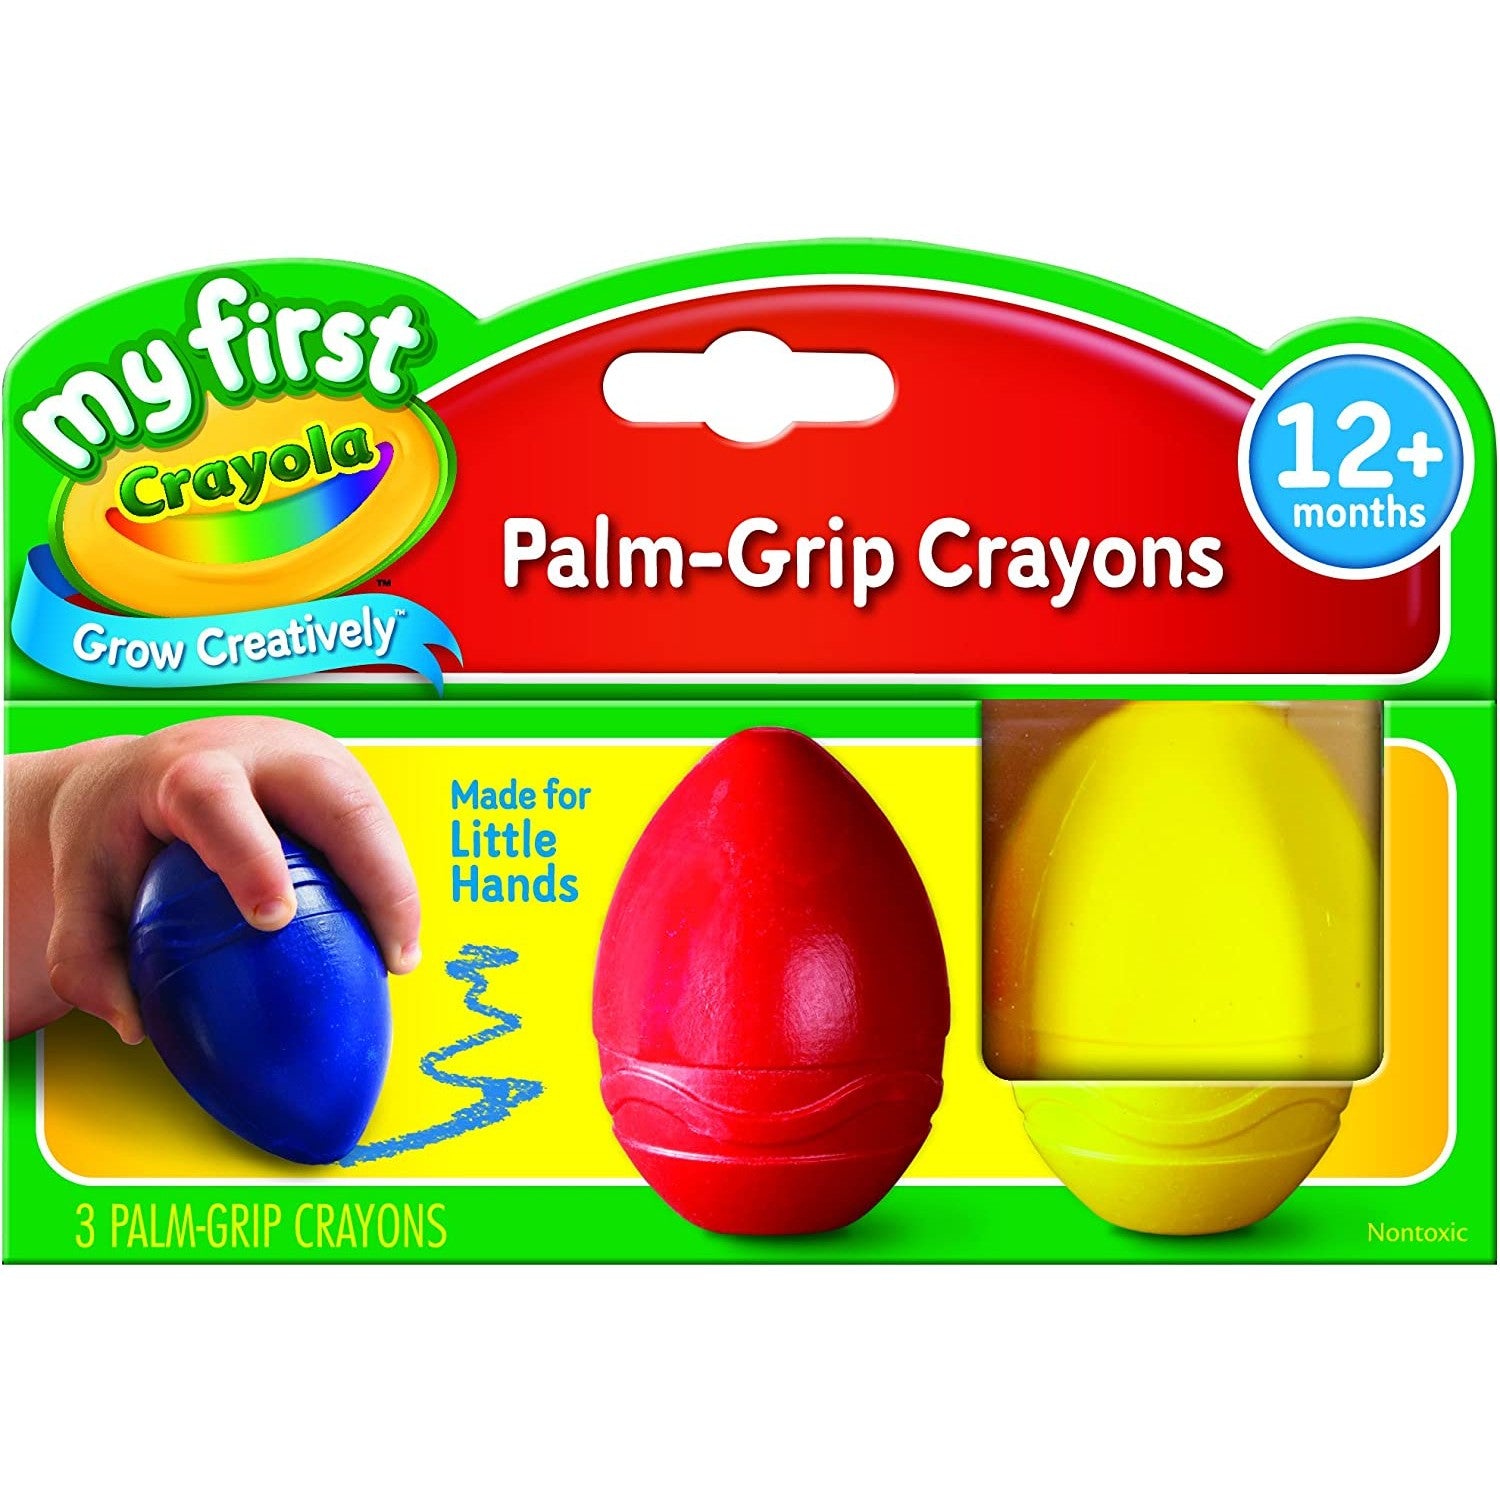 Introducing Crayola My First Egg Crayons - A must-have item for